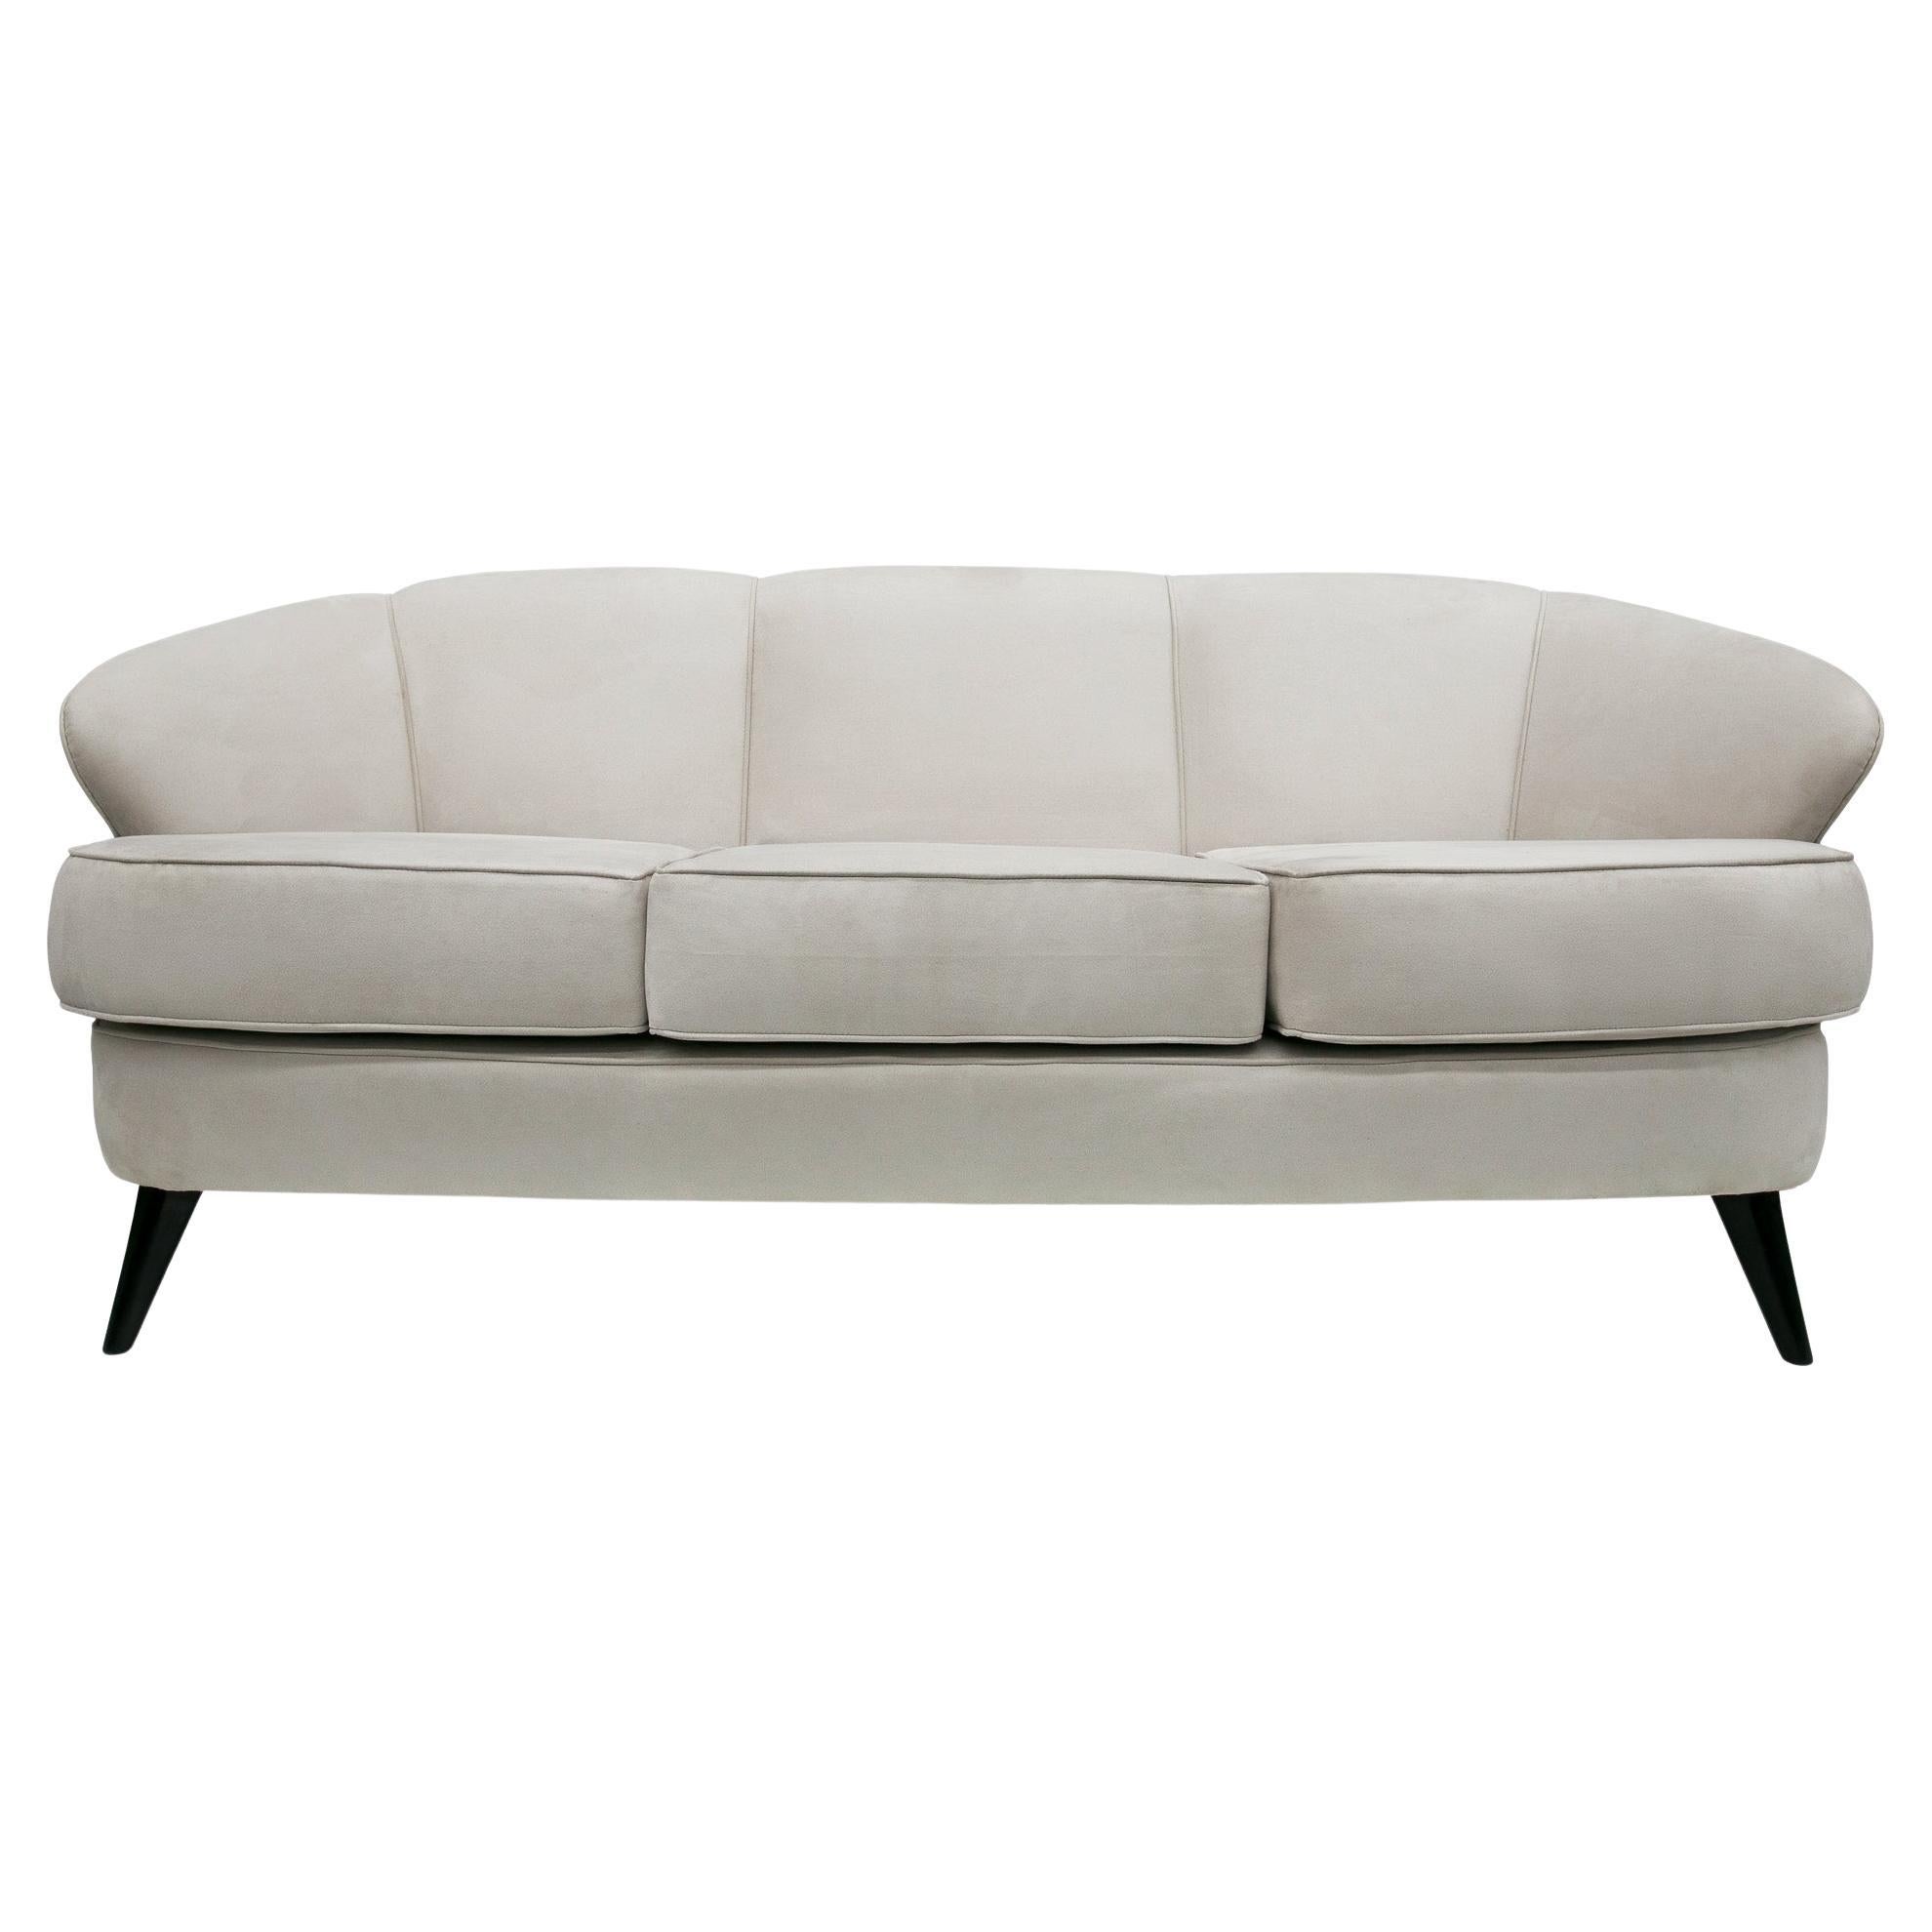 Available right now, this Brazilian modern sofa designed by Joaquim Tenreiro in the sixties is gorgeous! The model is called “Concha” (Shell in portuguese) and the sofa features a hardwood structure, upholstered seats in gray velvet, and four